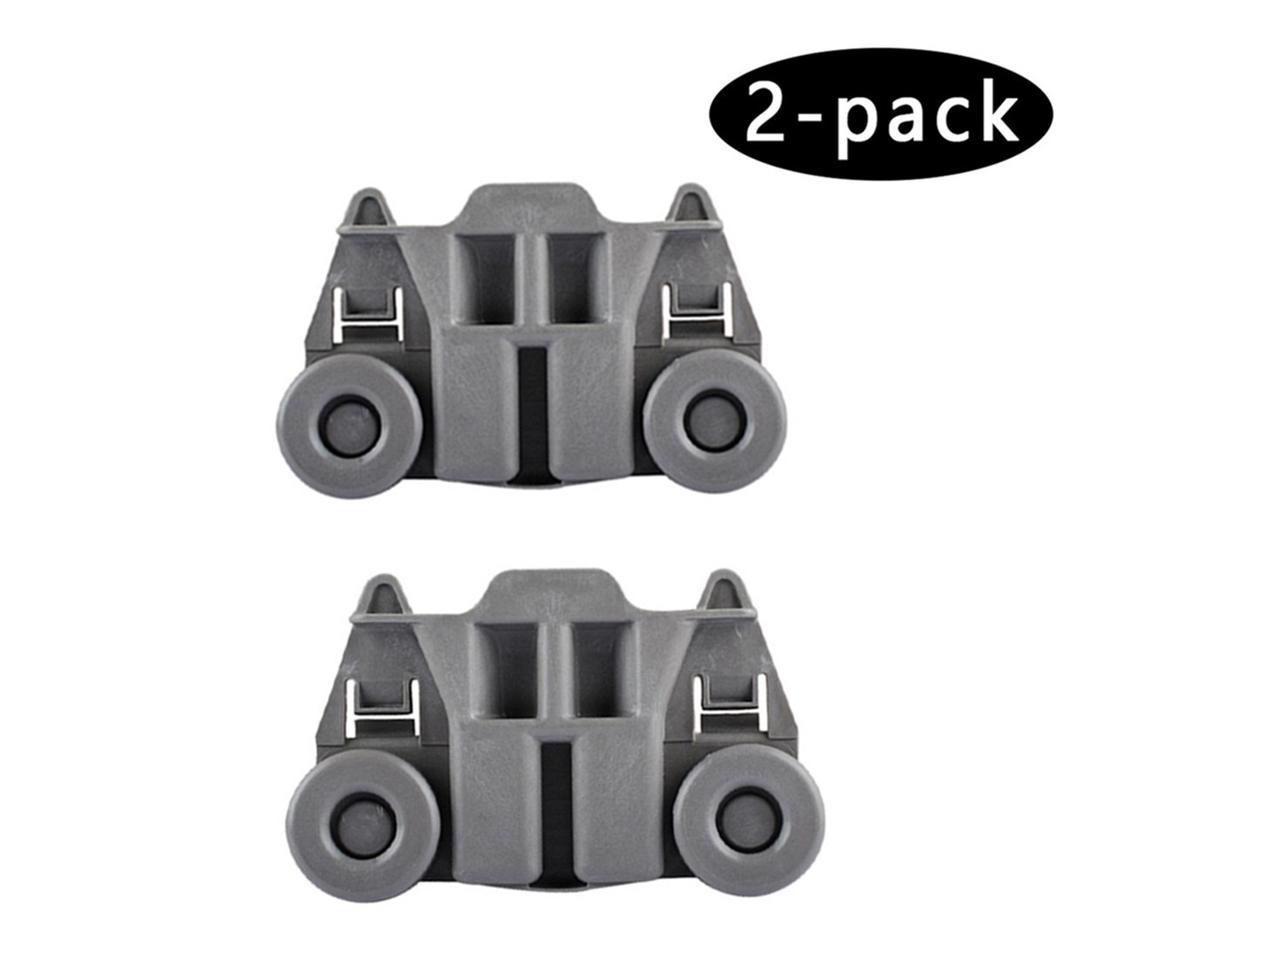 Upgraded W10195417 WPW10195417 Dishwasher Lower Wheels Replaces For 66513922K,66512762,AP4538395,PS2579553,EA2579553,AH2579553,Compatible With kenmore whirlpool kitchen-aid Dishwasher Wheel Lower Rack 